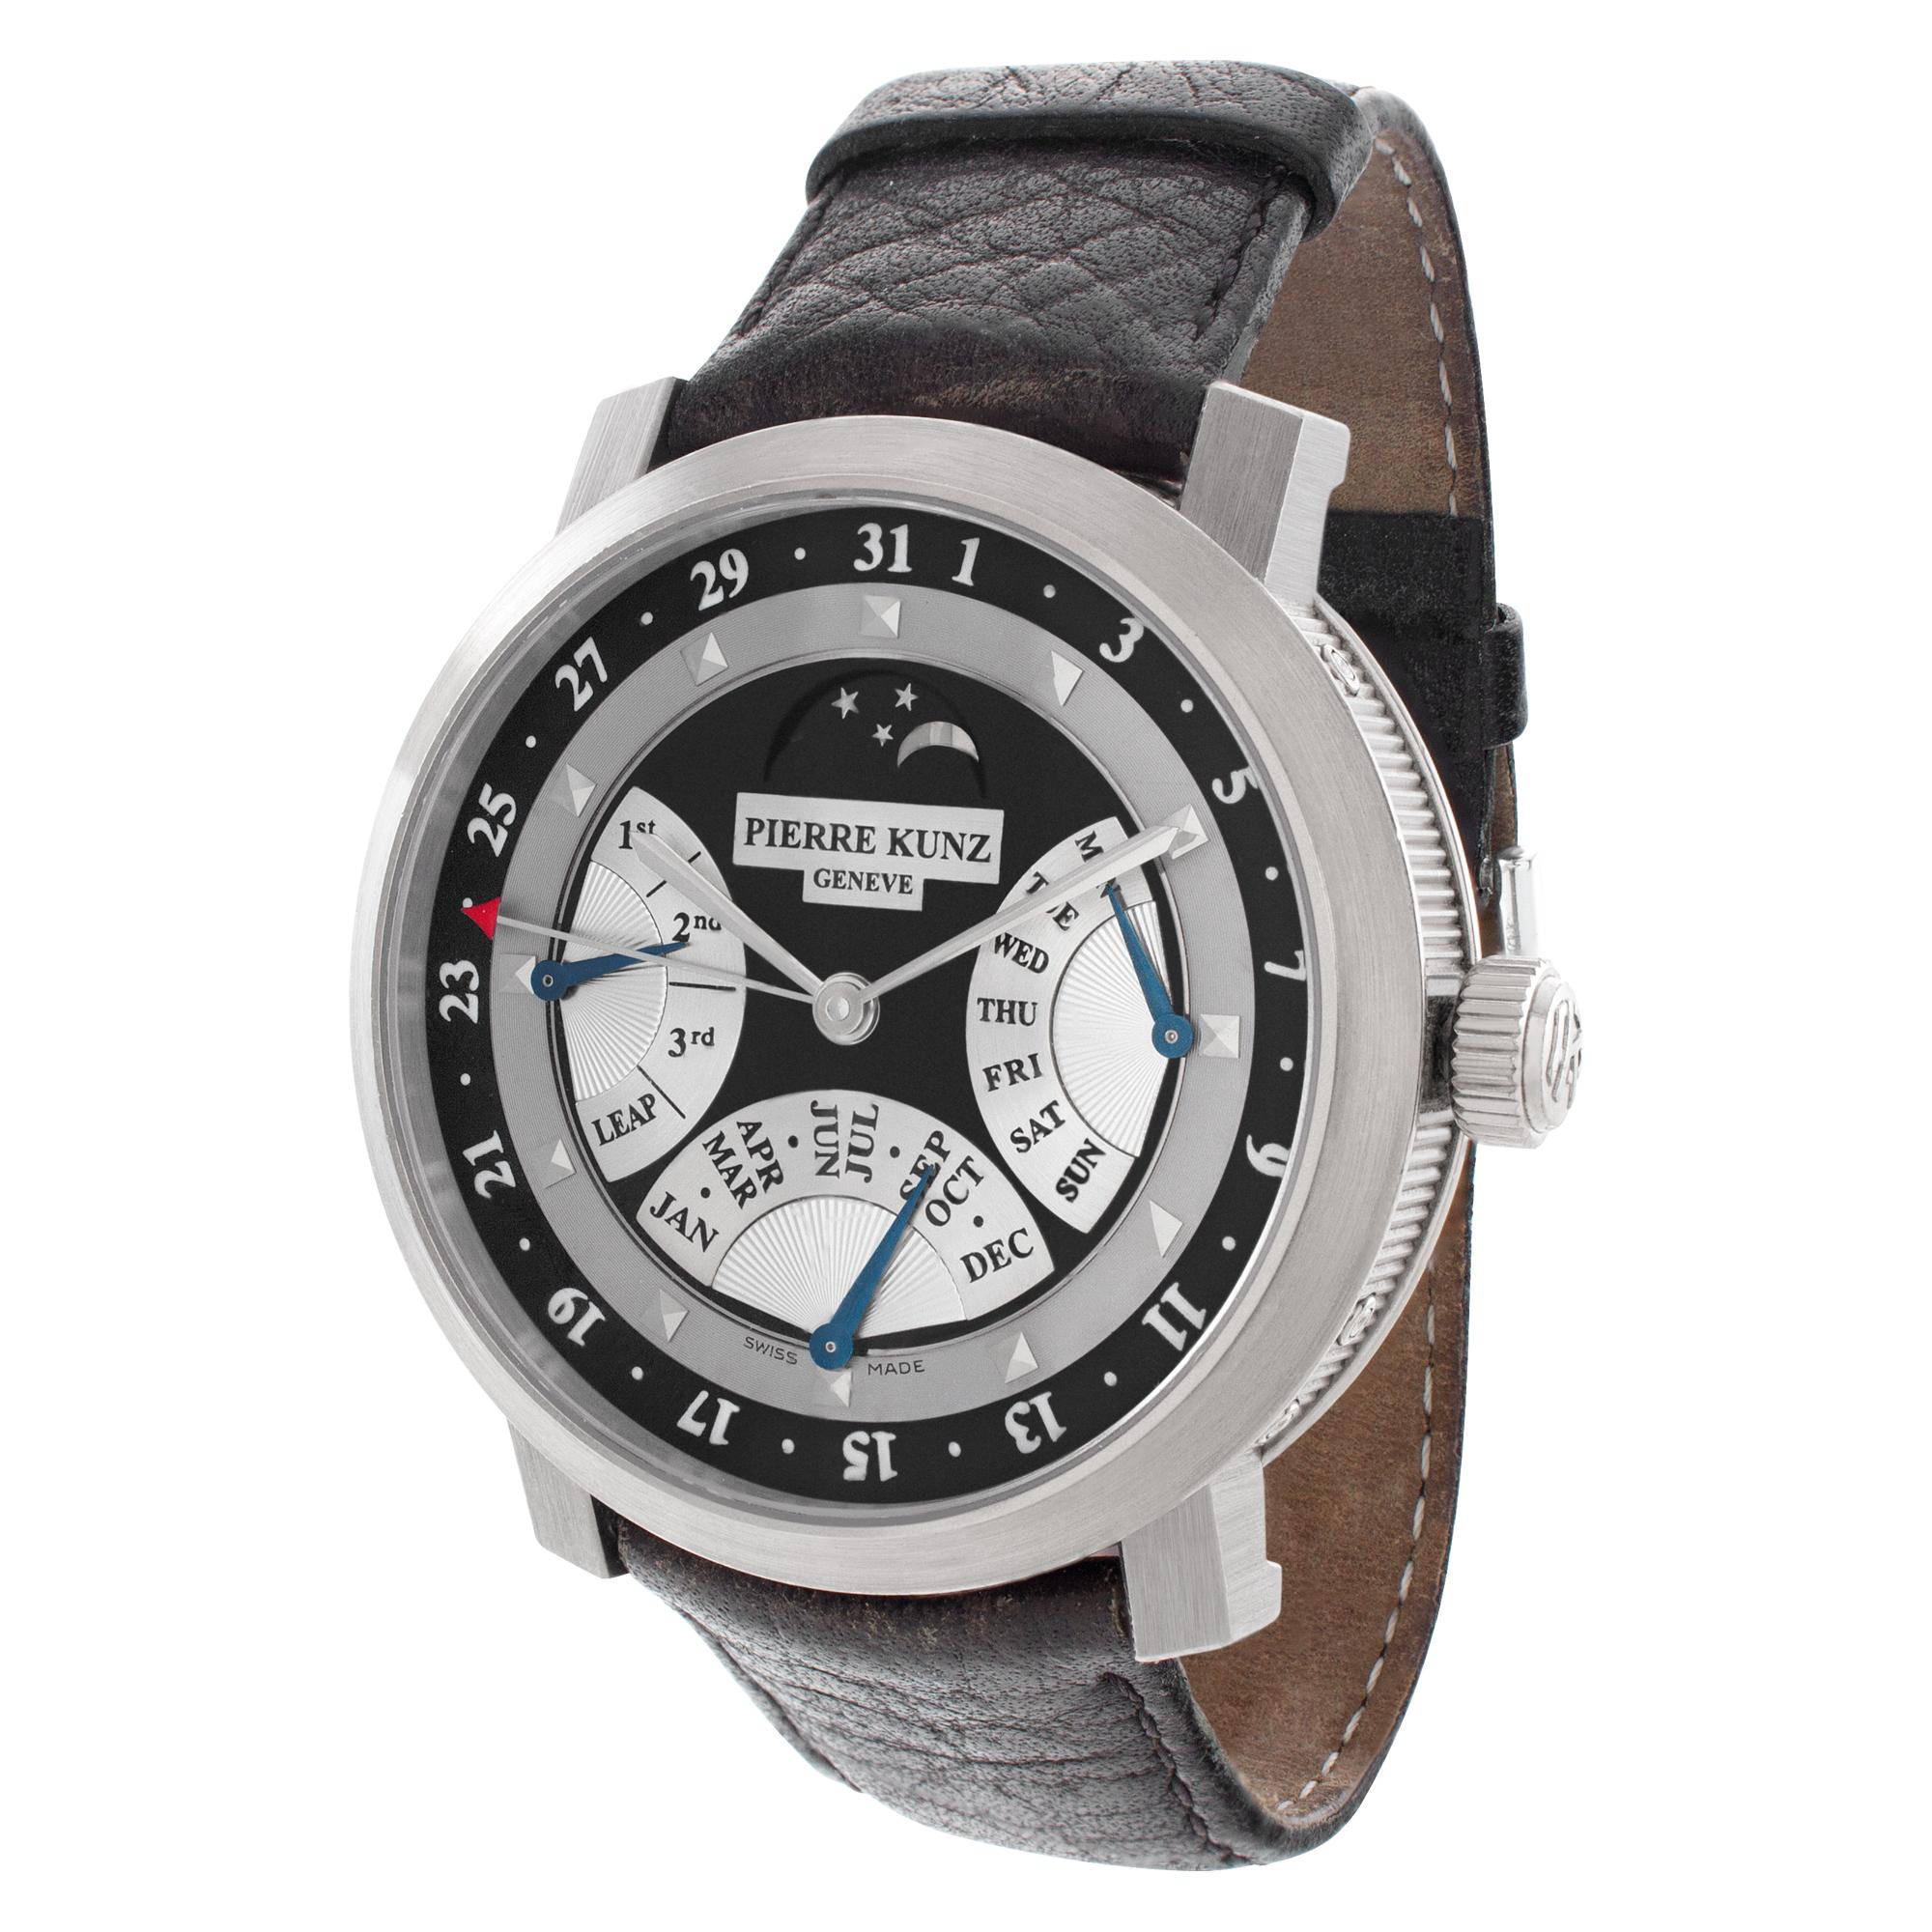 Pierre Kunz Grande Complication in 18k white gold on leather strap. Auto w/ date, day, month, moonphase, power reserve and perpetual calendar. With box and papers. 44 mm case size. Ref G008 QPRI. Fine Pre-owned Pierre Kunz Watch.

Certified preowned